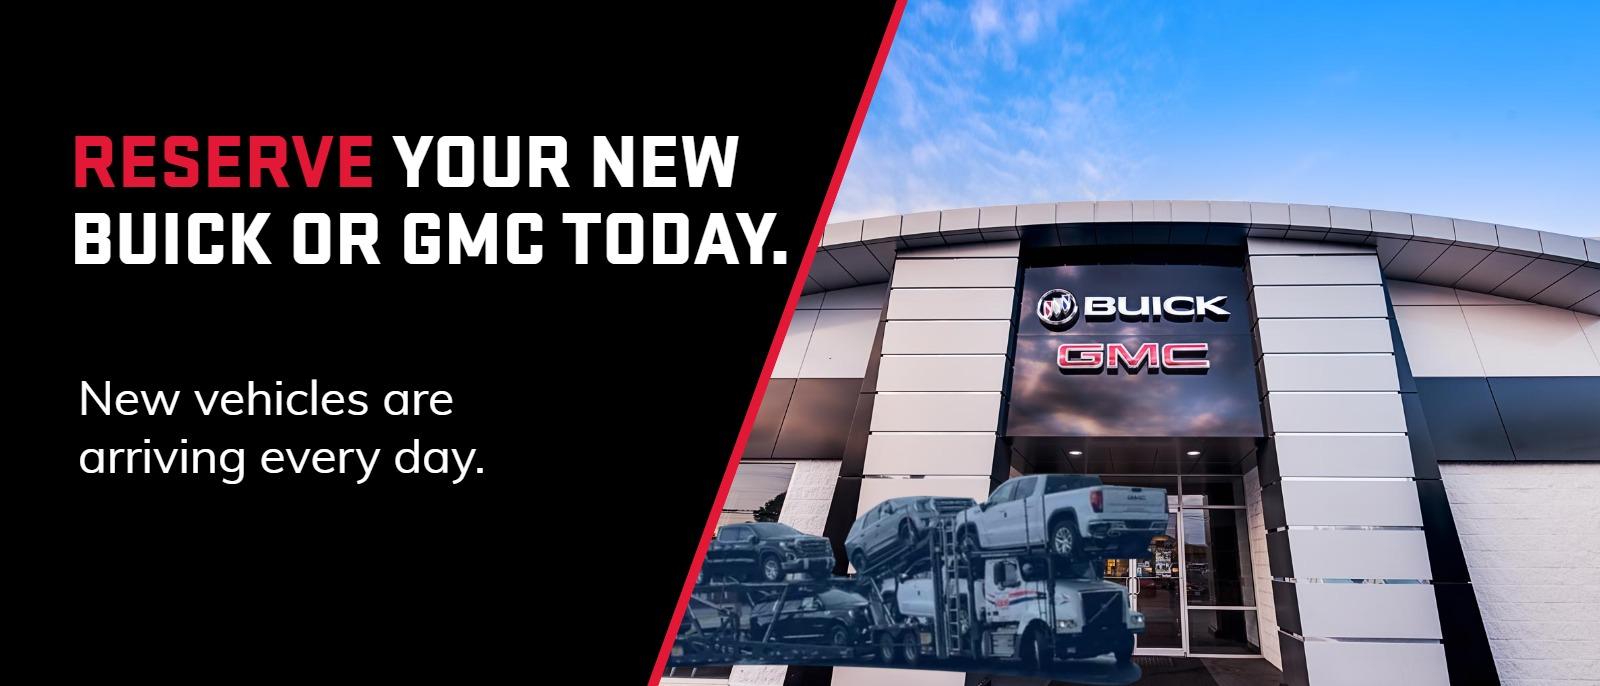 Reserve Your New Buick or GMC Today. New vehicles are arriving every day